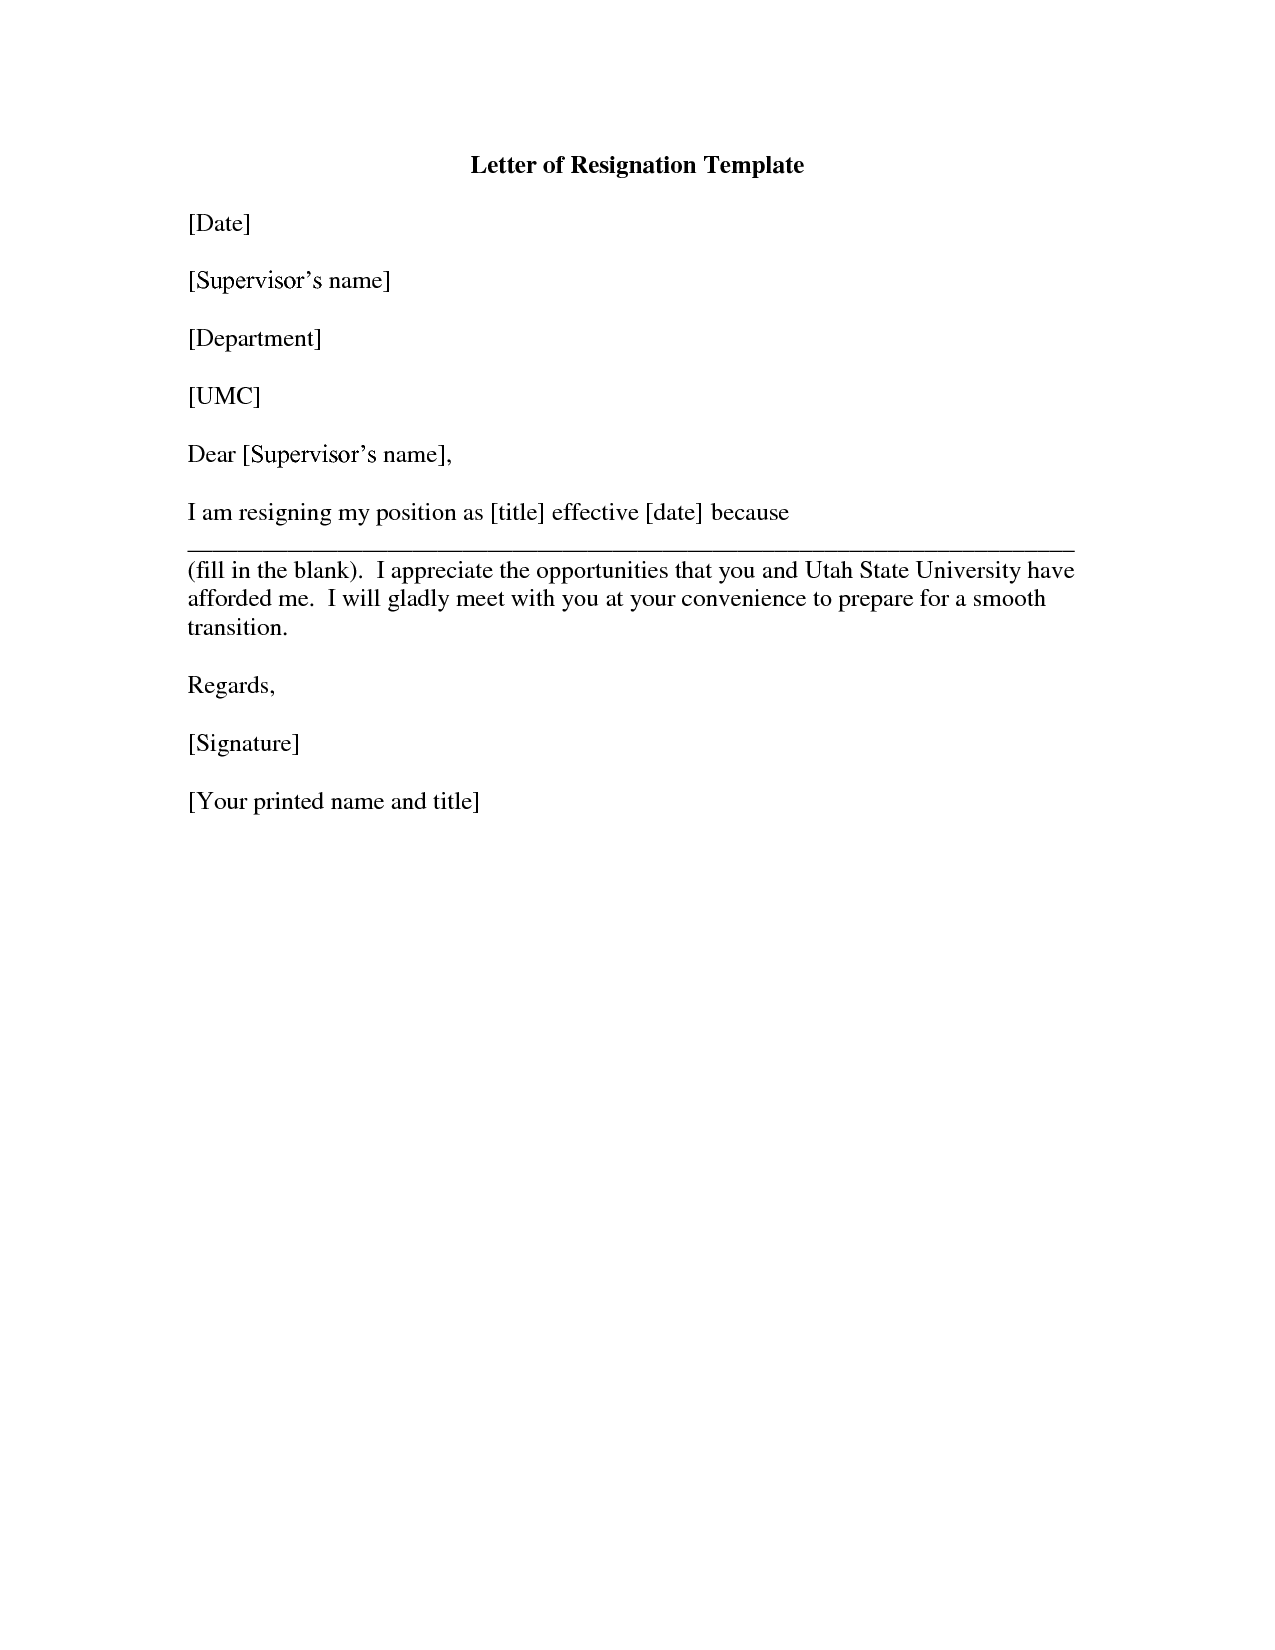 letter-of-resignation-free-printable-documents